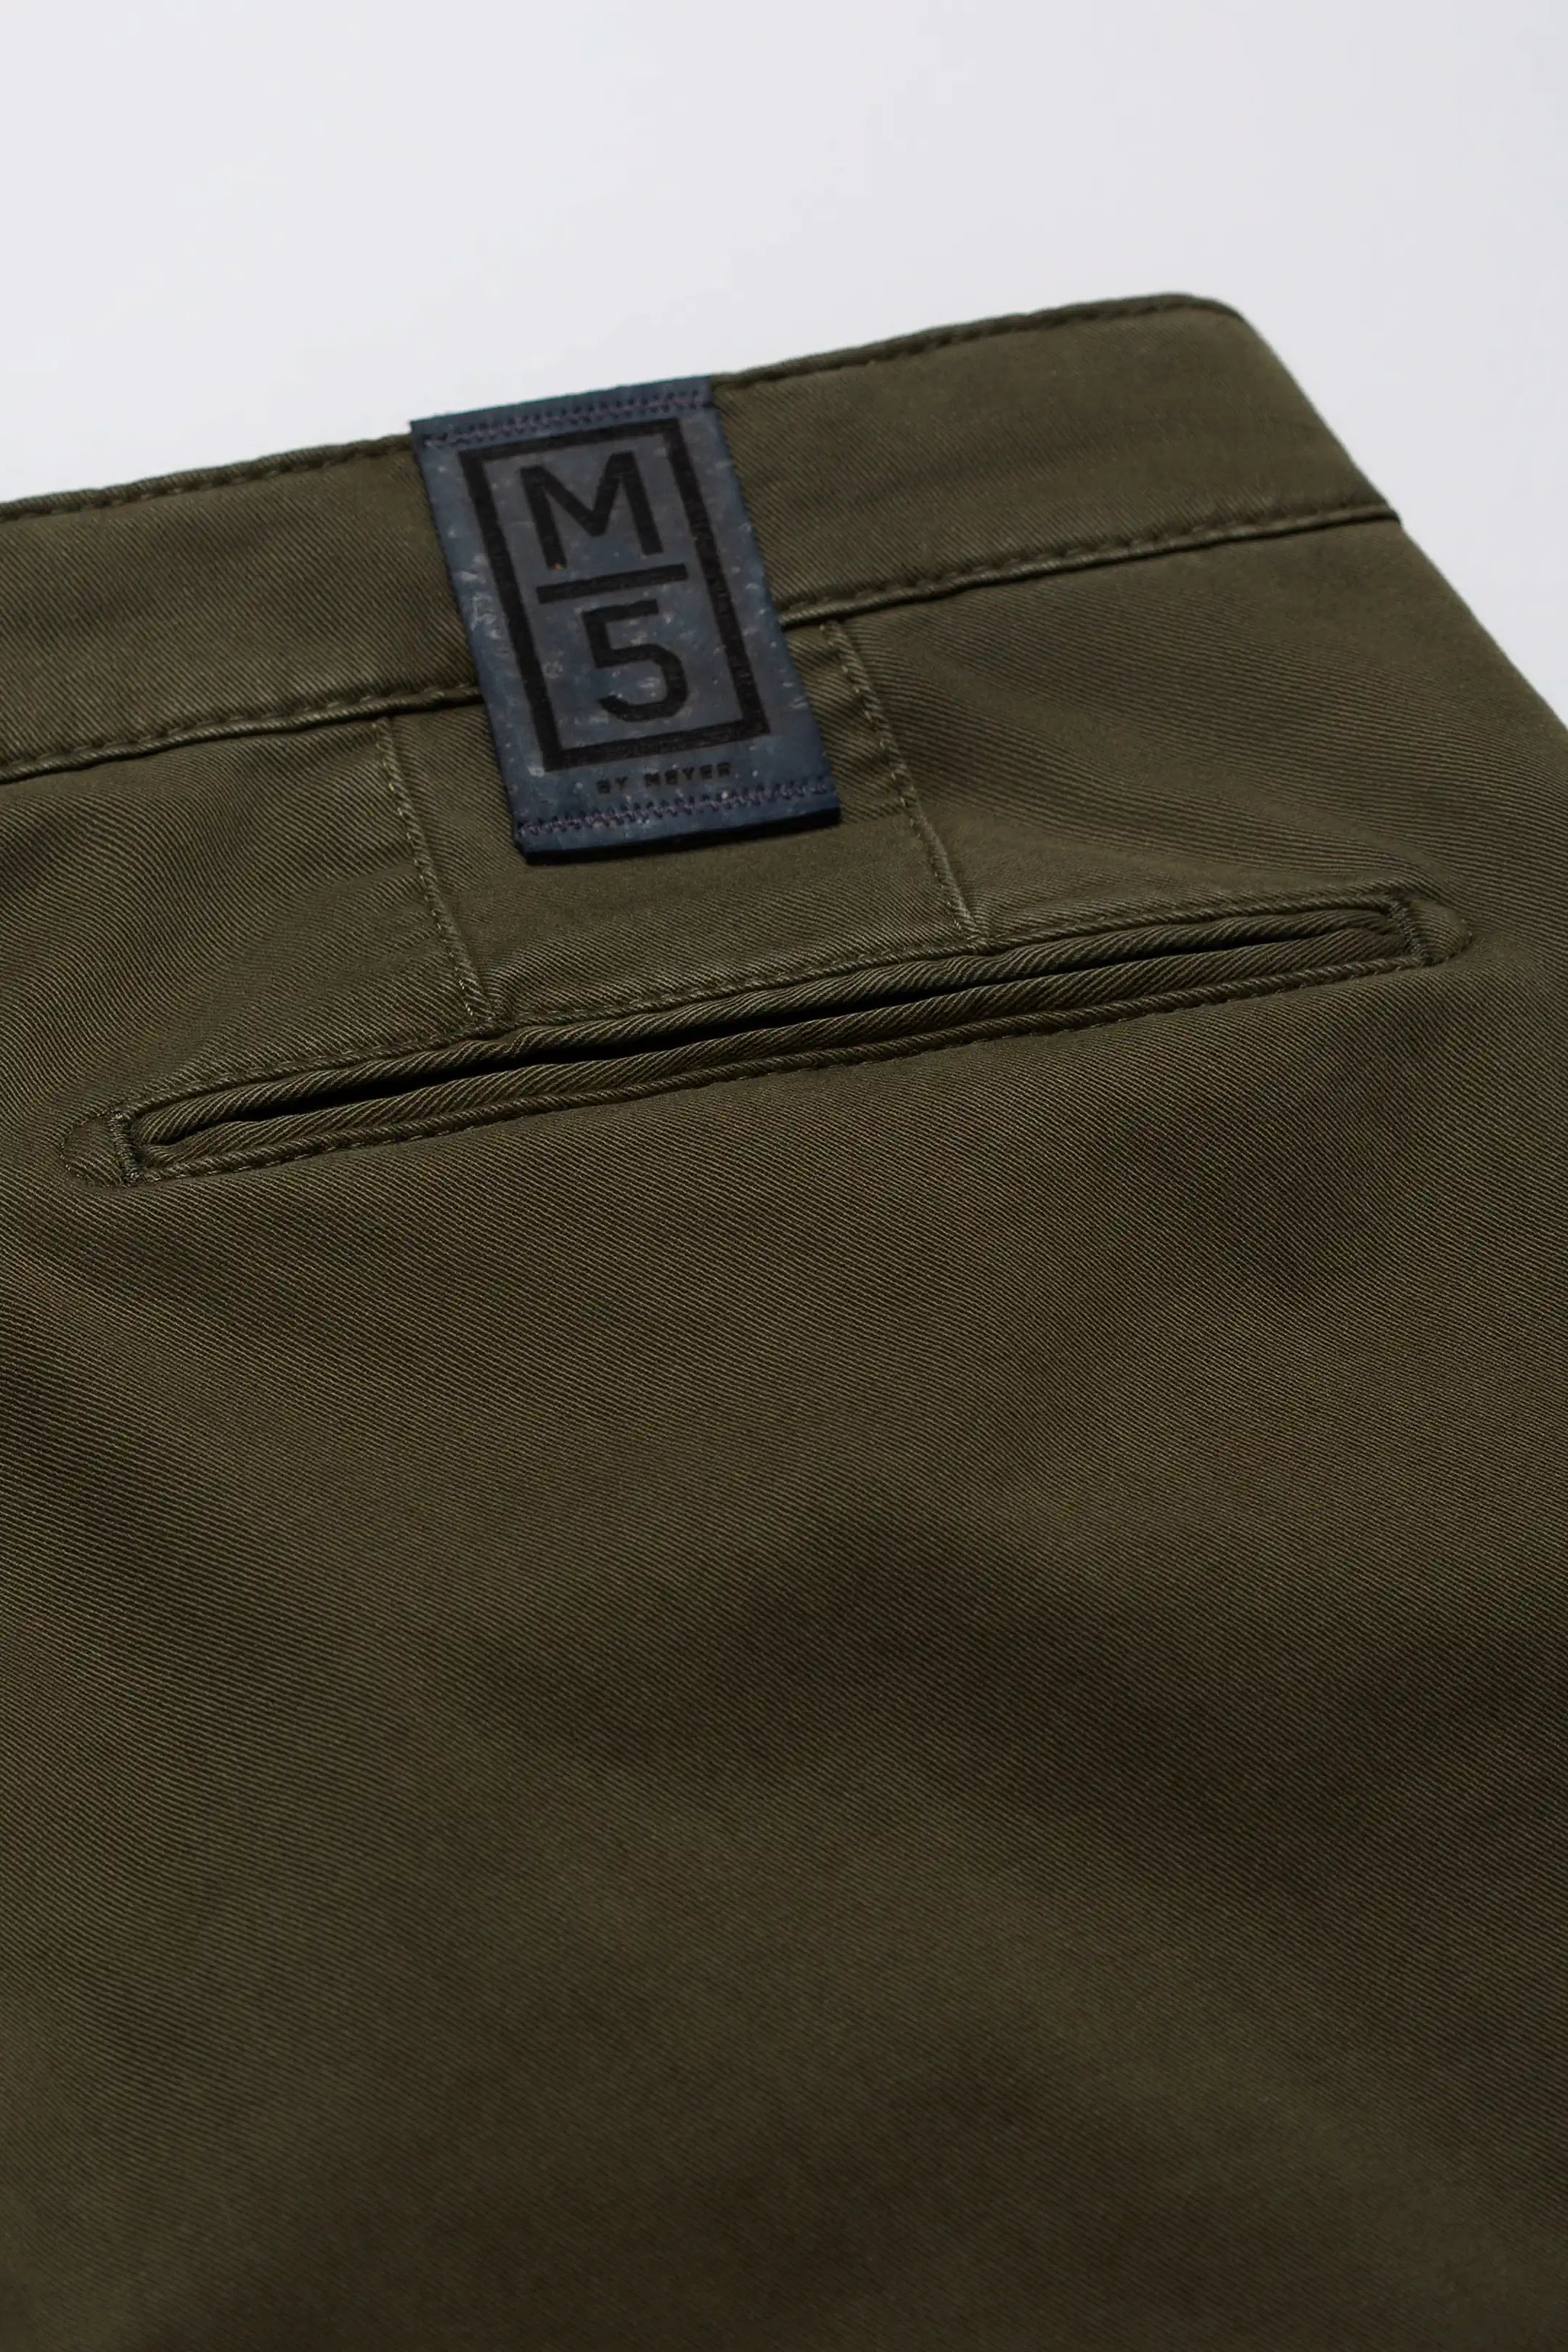 MEYER M5 Trousers - 6001 Soft Stretch Cotton Chinos - Green